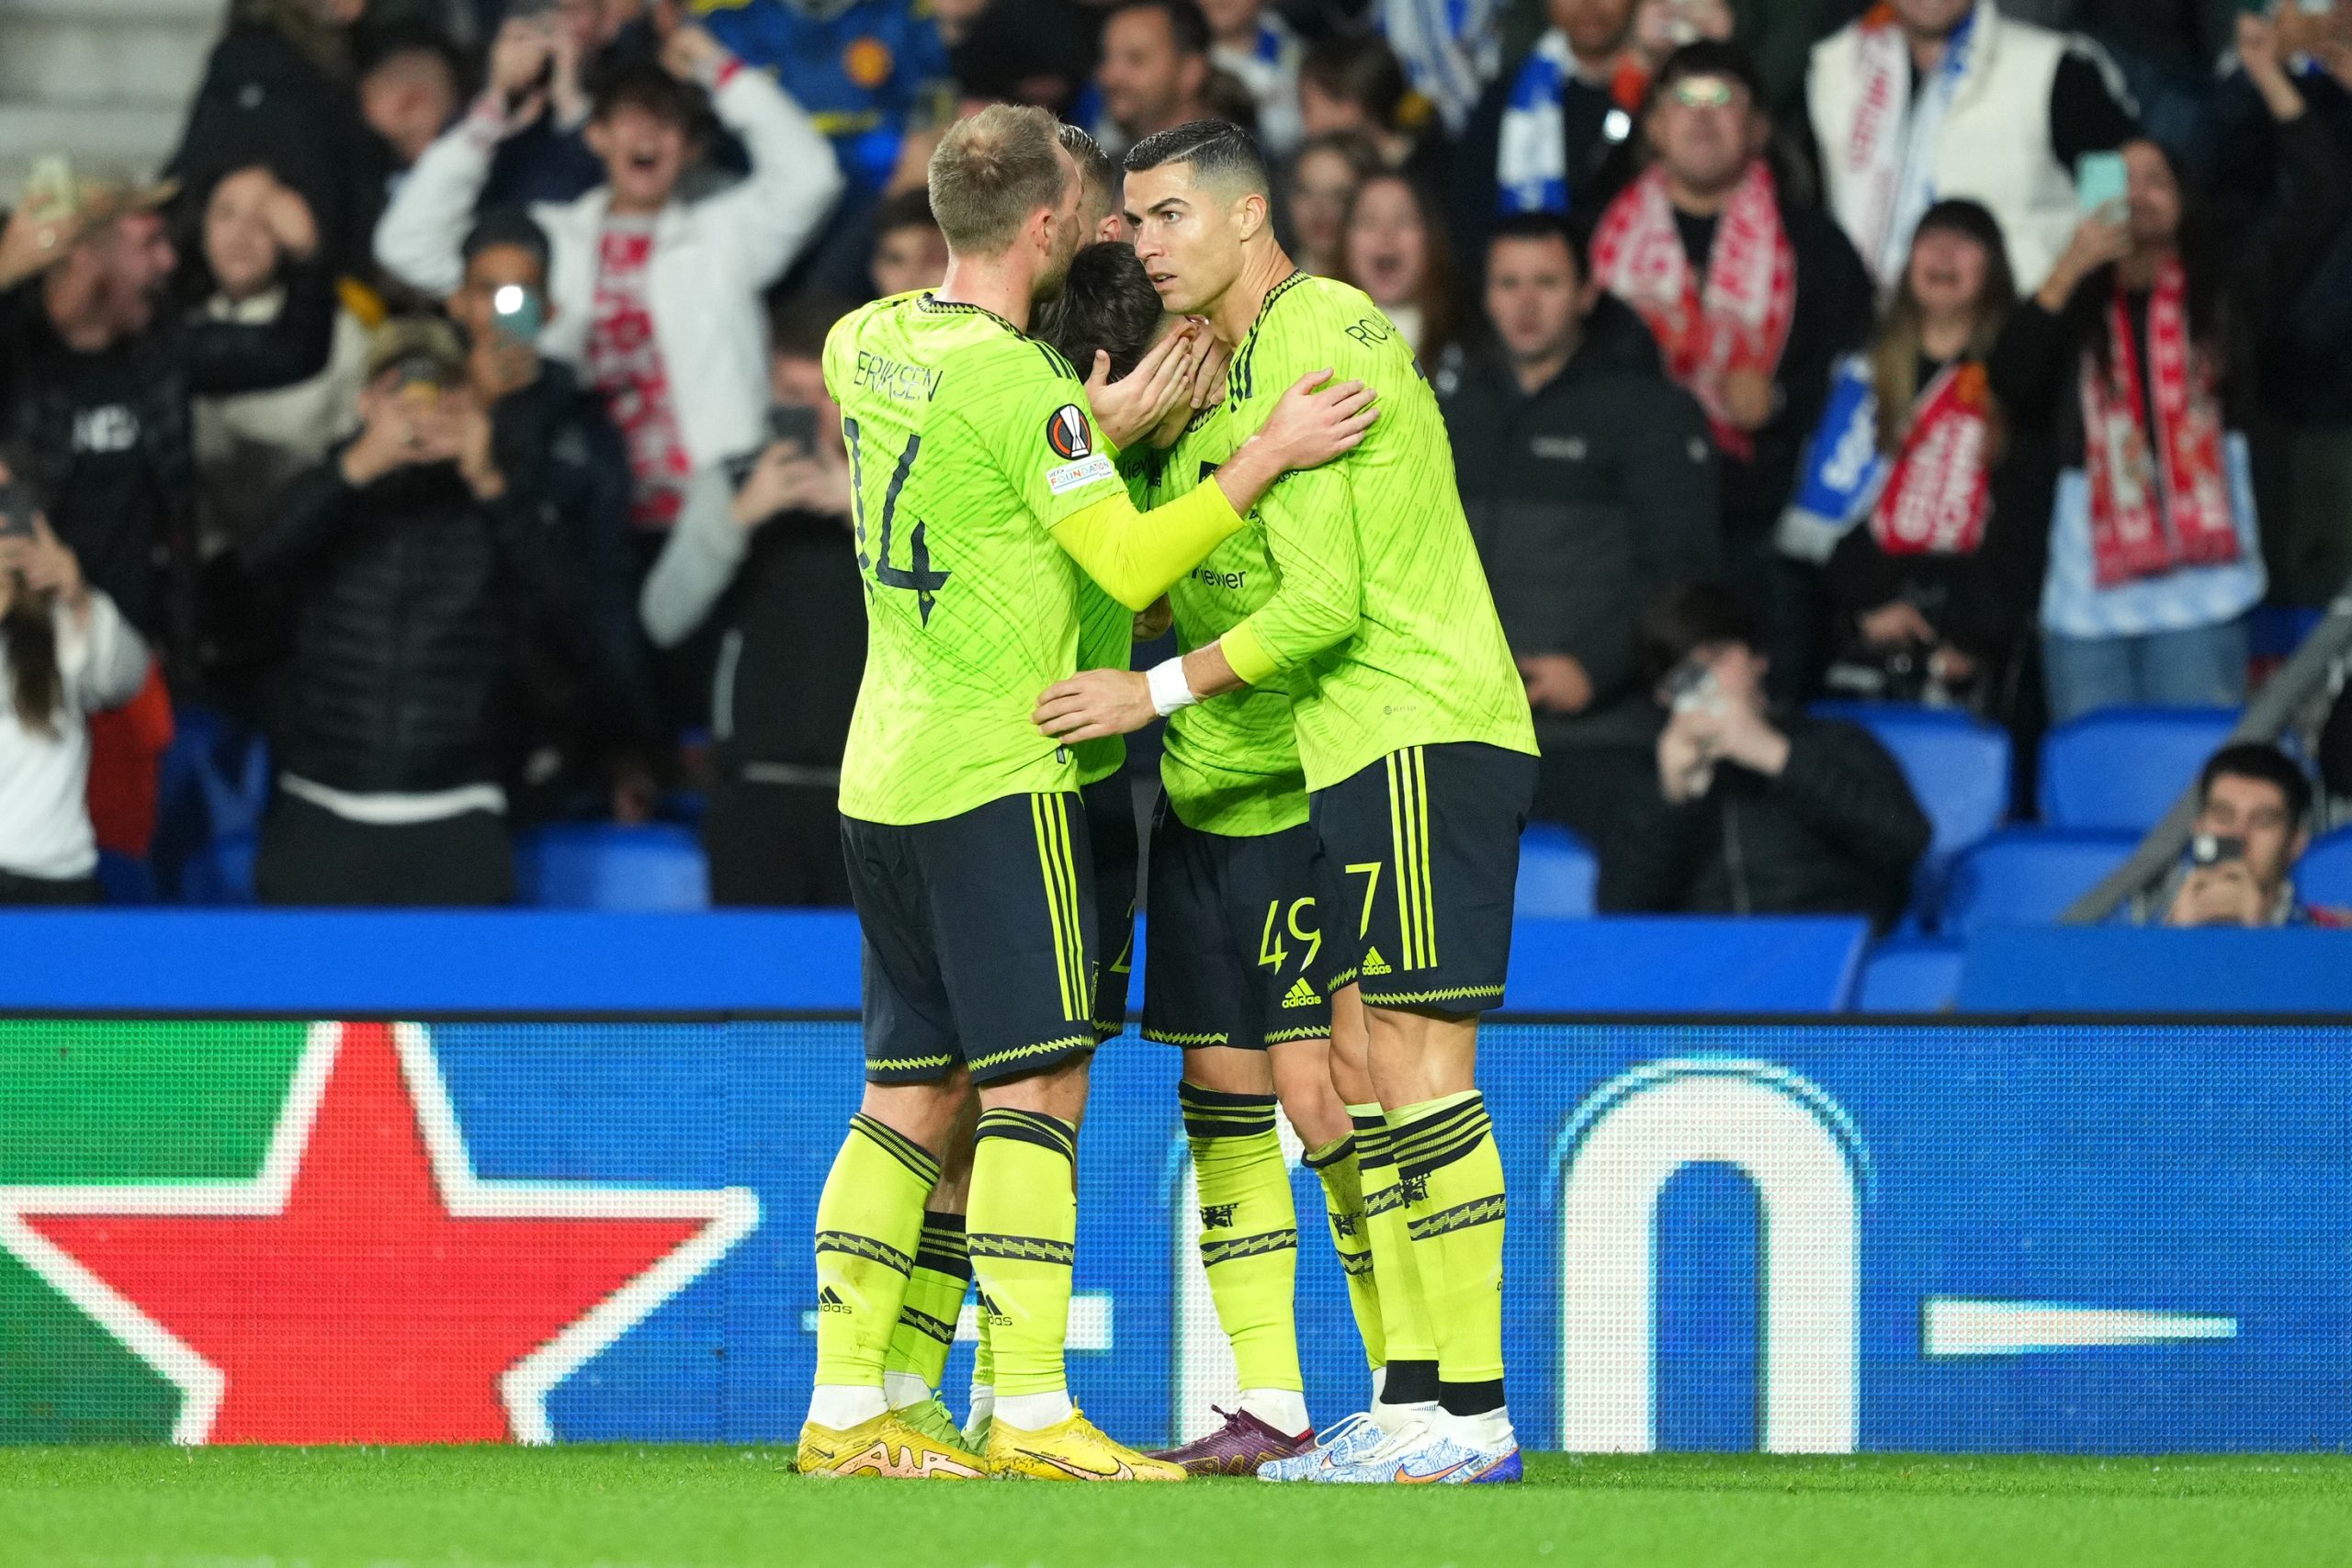 Christian Eriksen "sad" about untimely exit of Cristiano Ronaldo from Manchester United.